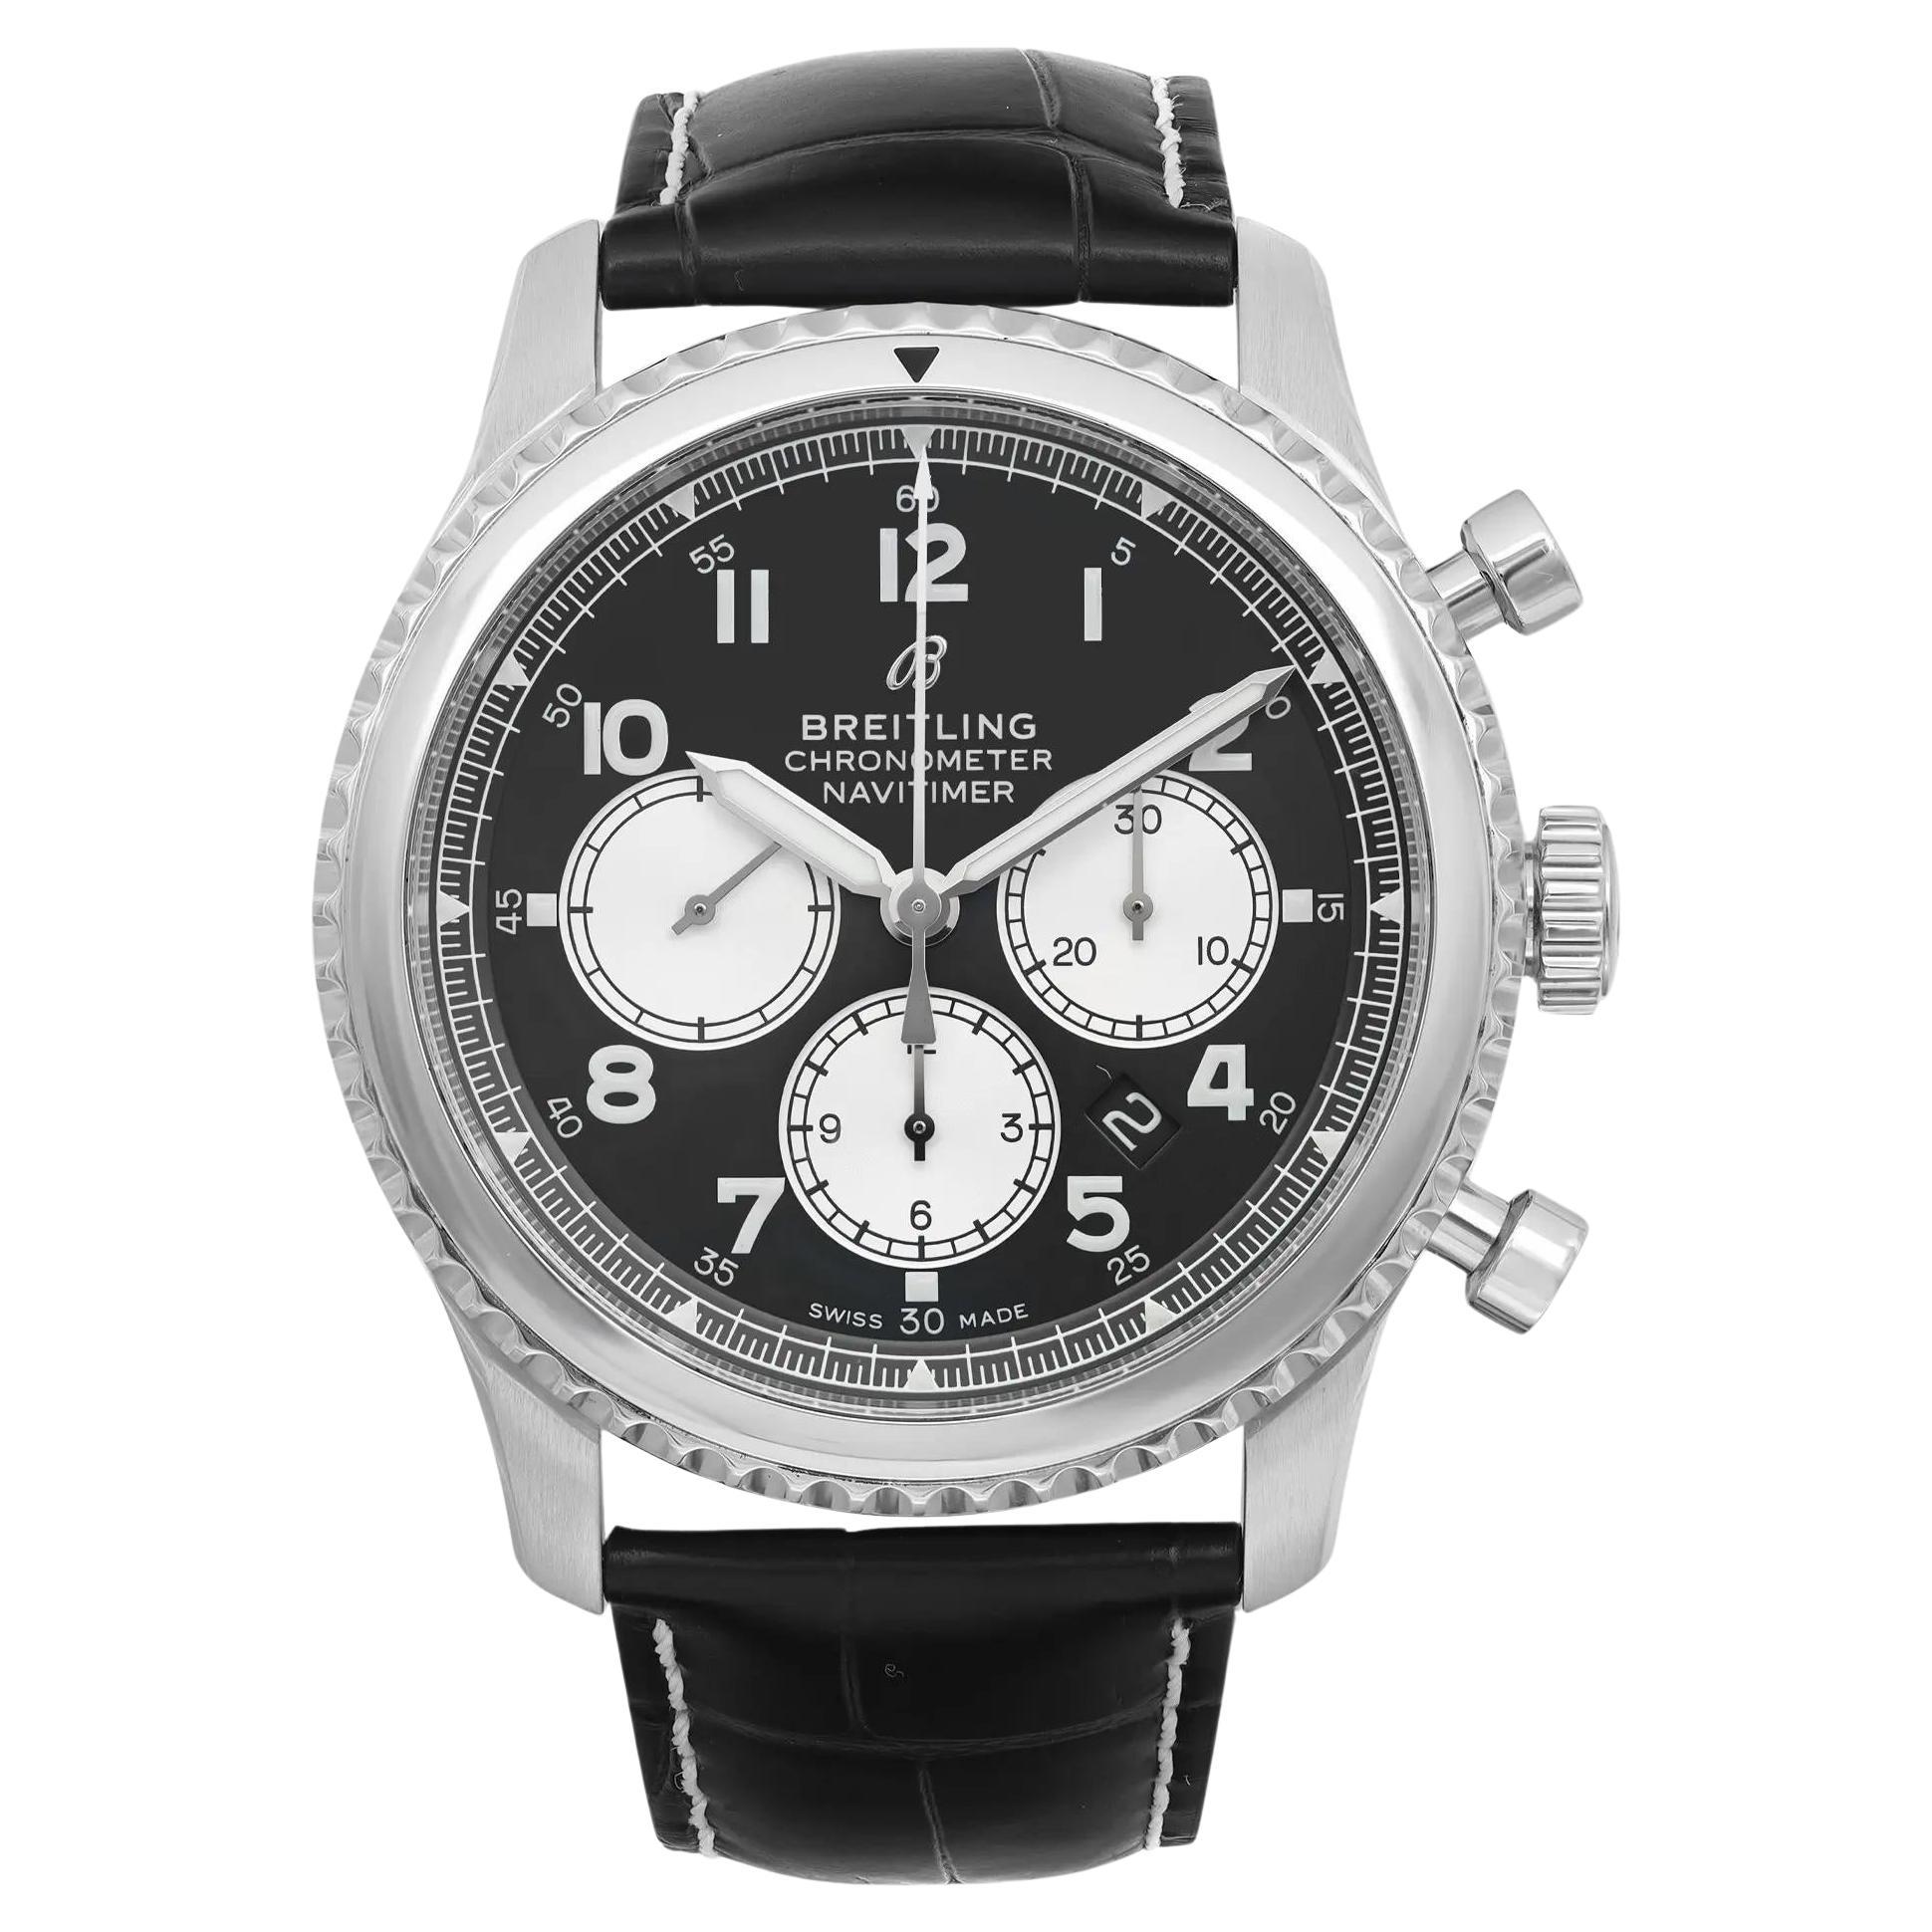 Breitling Navitimer Aviator 8 Steel Black Dial Automatic Watch AB0117131B1 For Sale